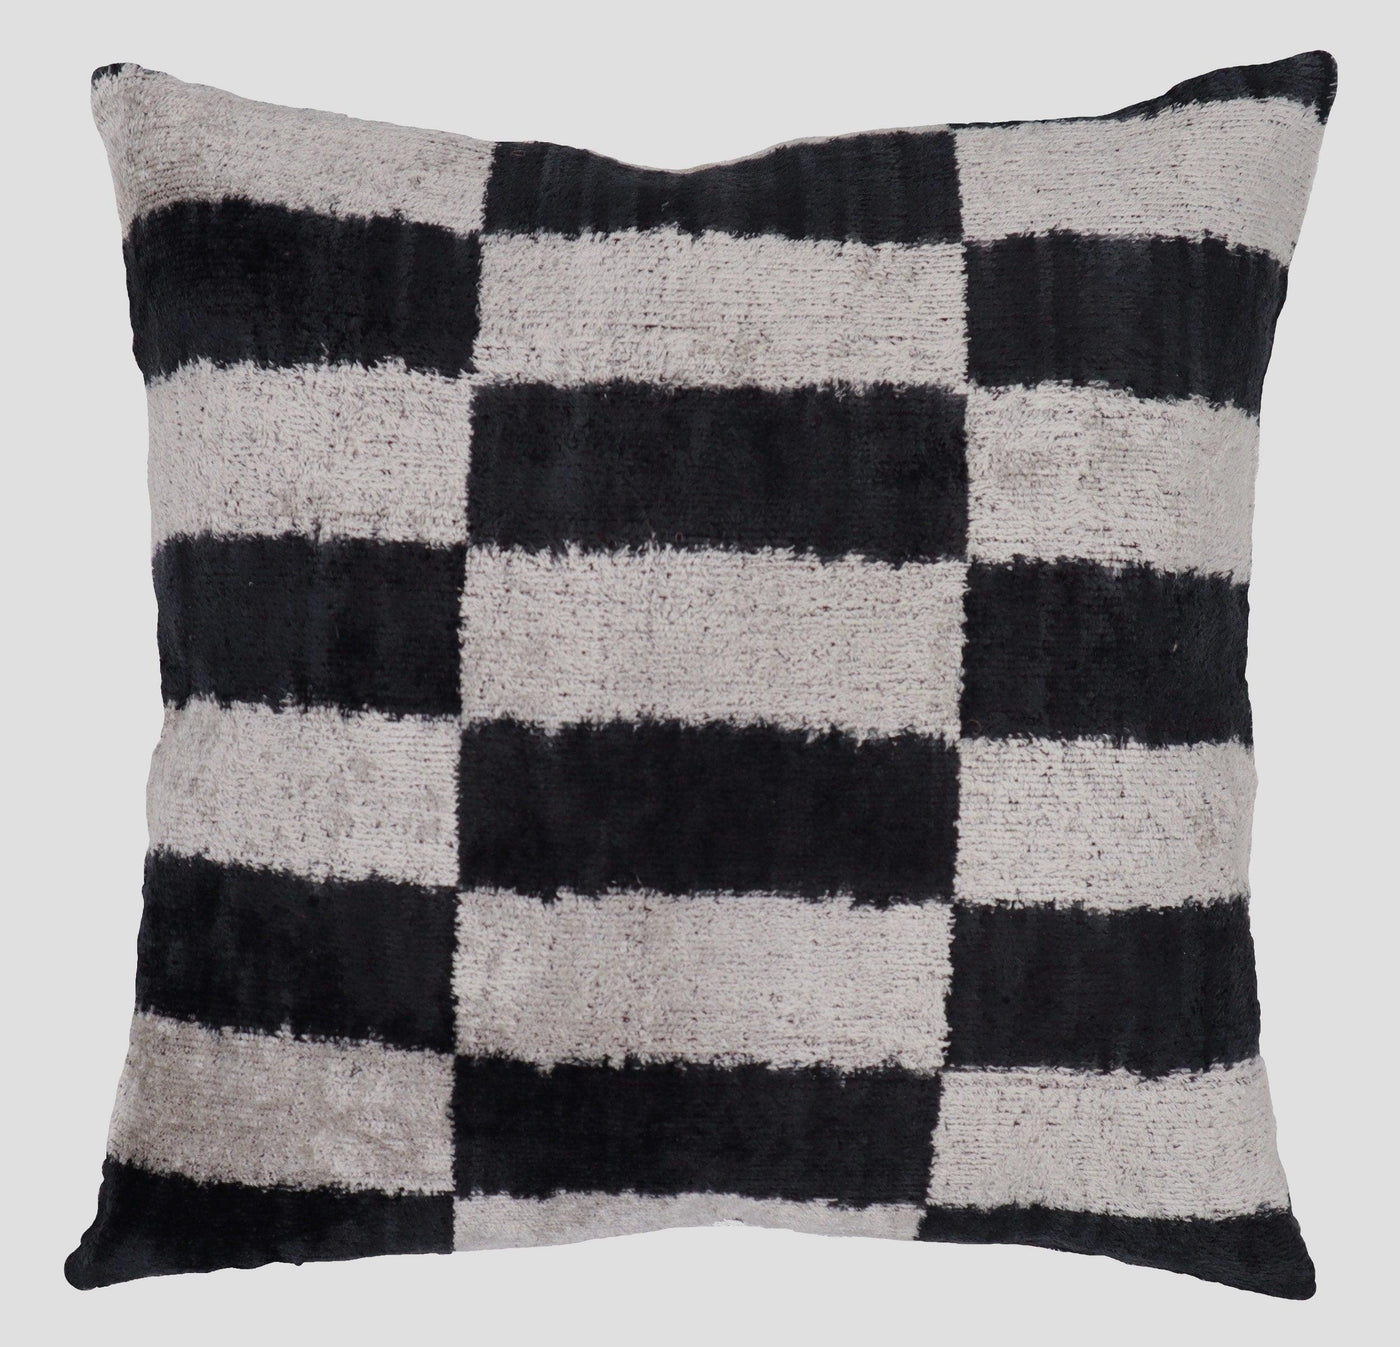 Canvello Decorative Black And White Lumbar Pillow | 16 x 16 in (40 x 40 cm)